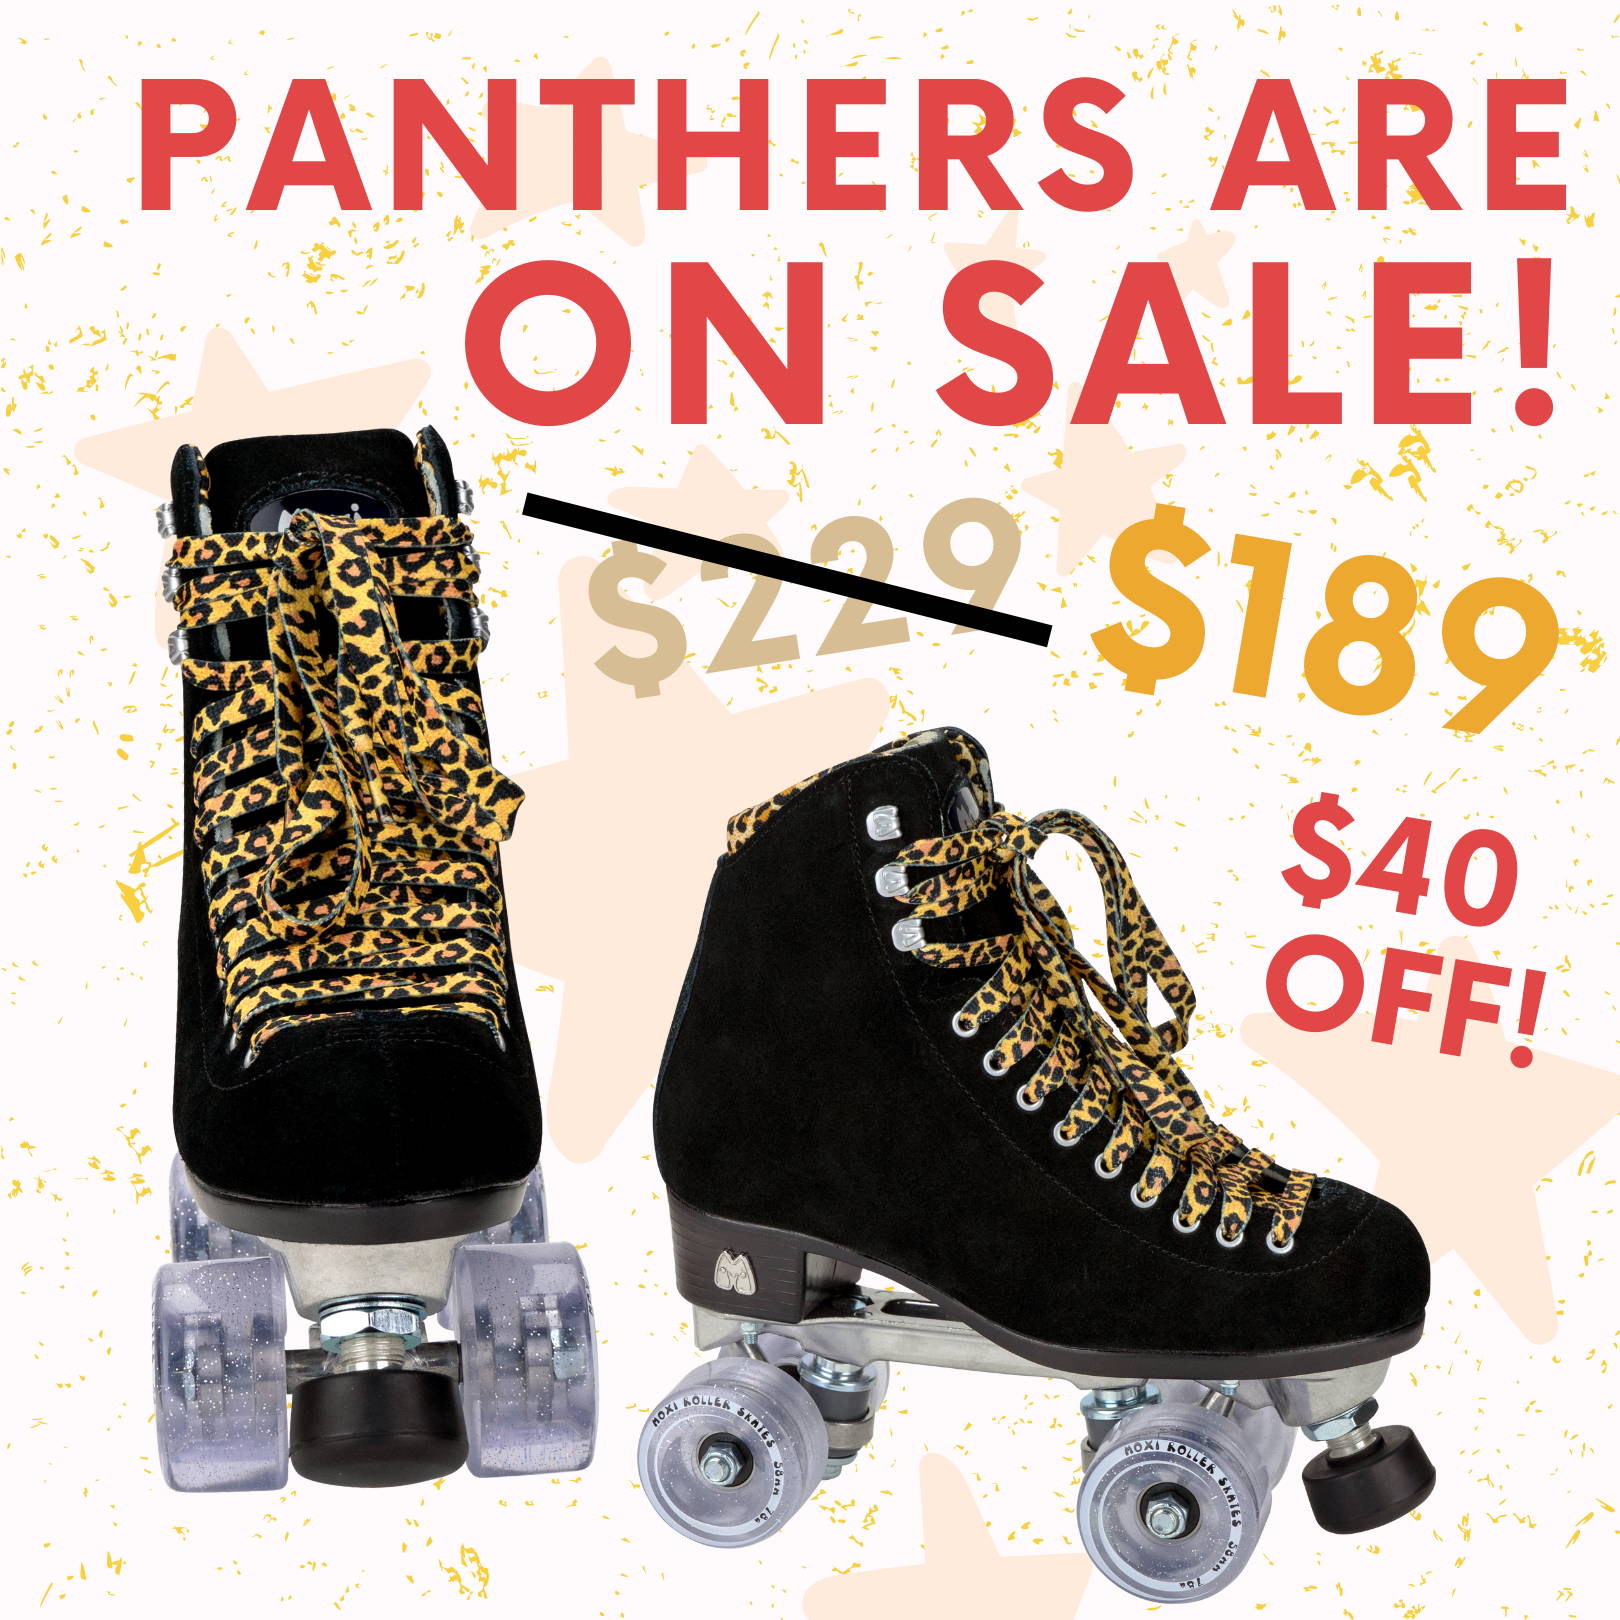 panthers are on sale for $189, $40 off